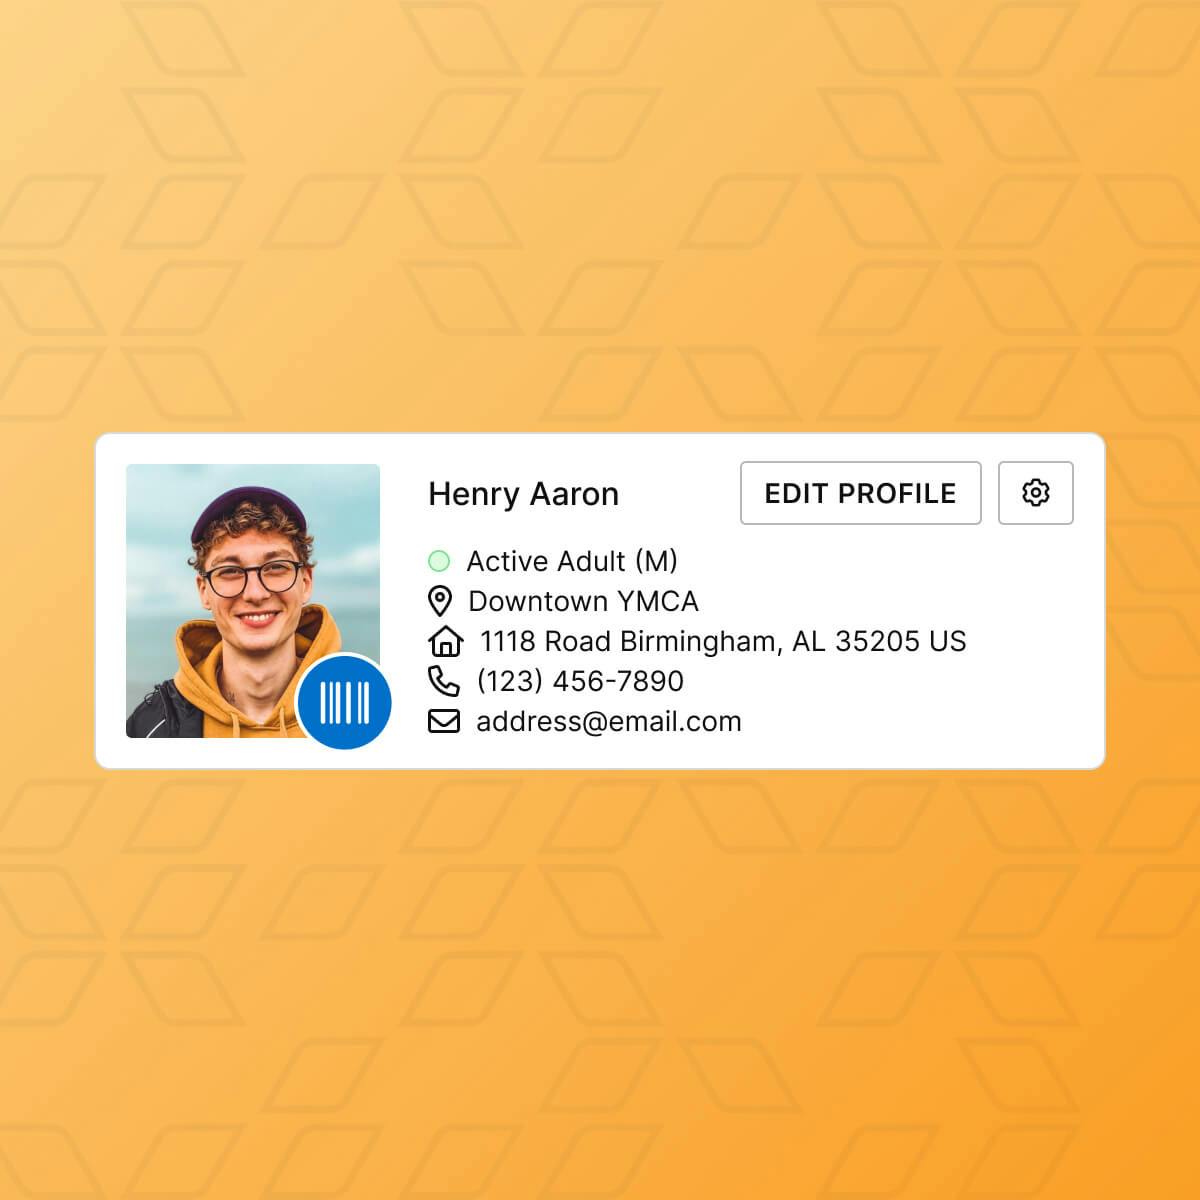 Member profile of Henry Aaron on Daxko's nonprofit CRM software, highlighting streamlined member management.